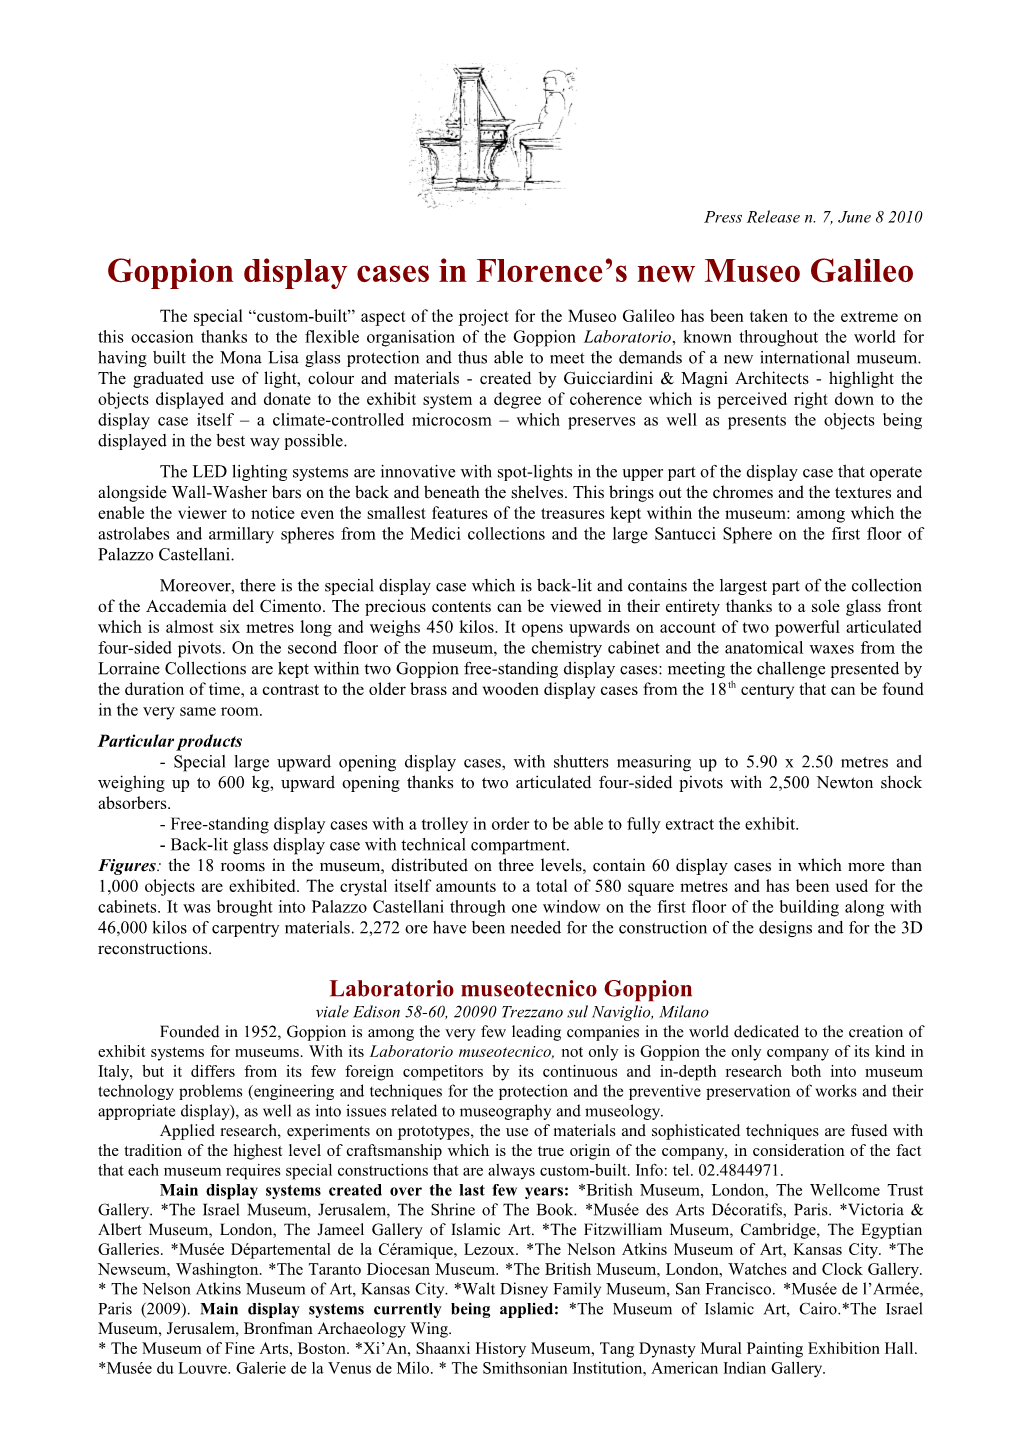 Goppion Display Cases in Florence S New Museo Galileo